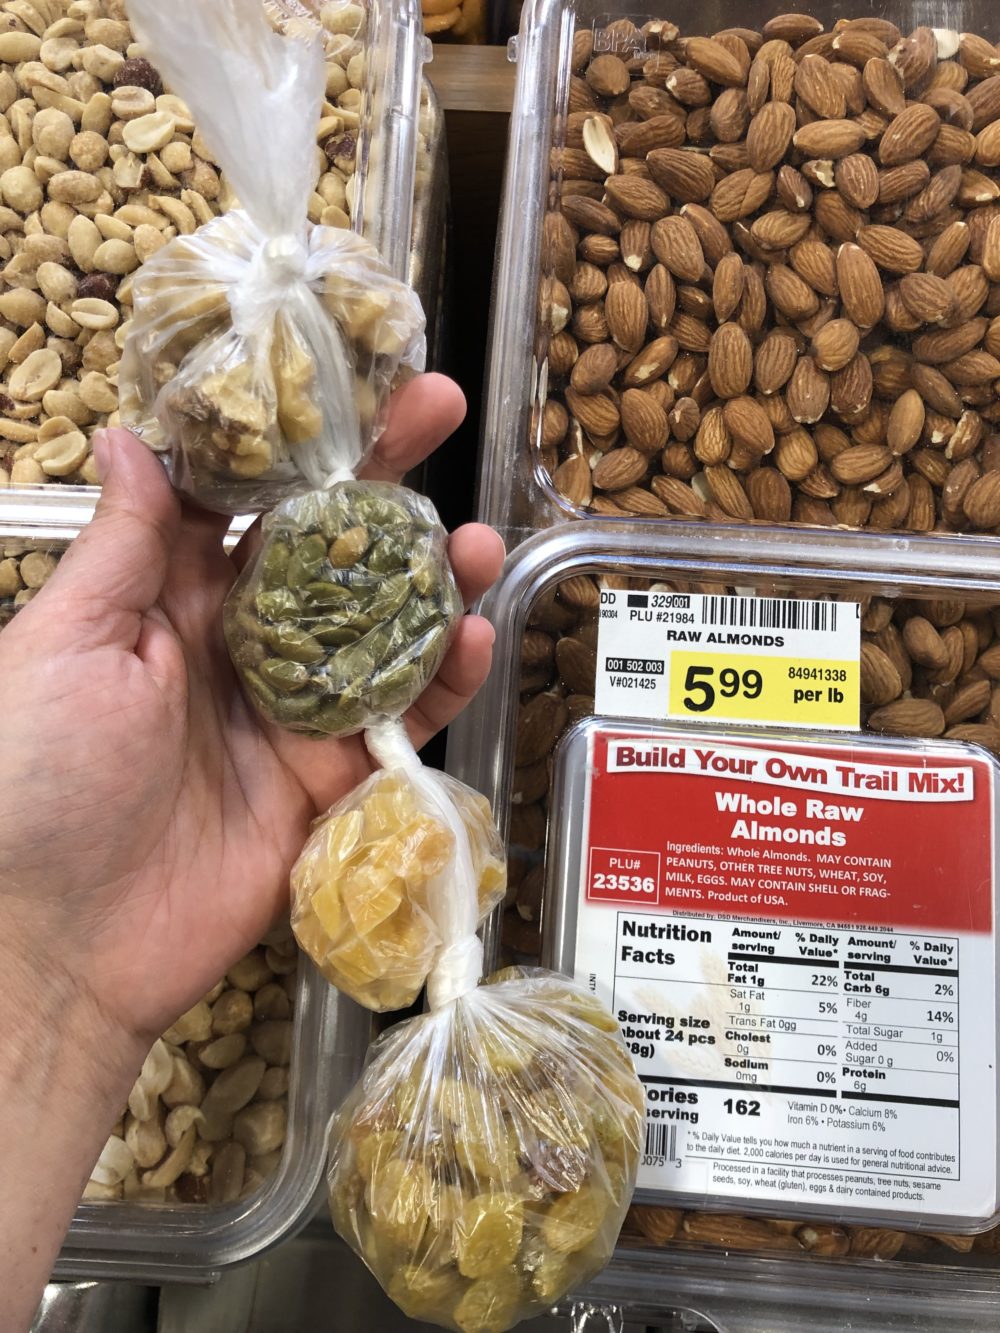 Nuts and seeds in separate bags. 